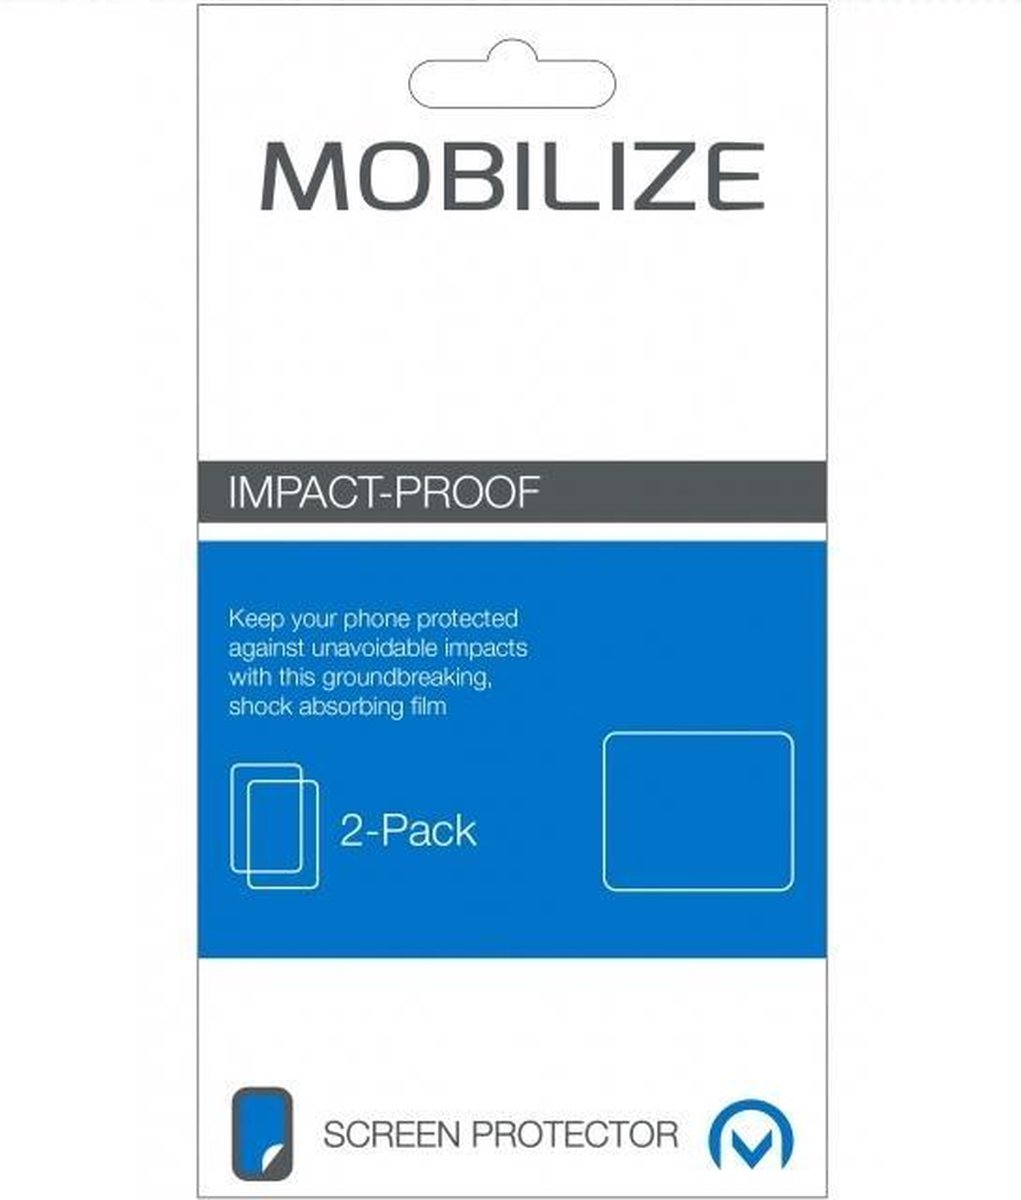 Mobilize Impact-Proof 2-pack Screen Protector Galaxy Tab 4 10.1